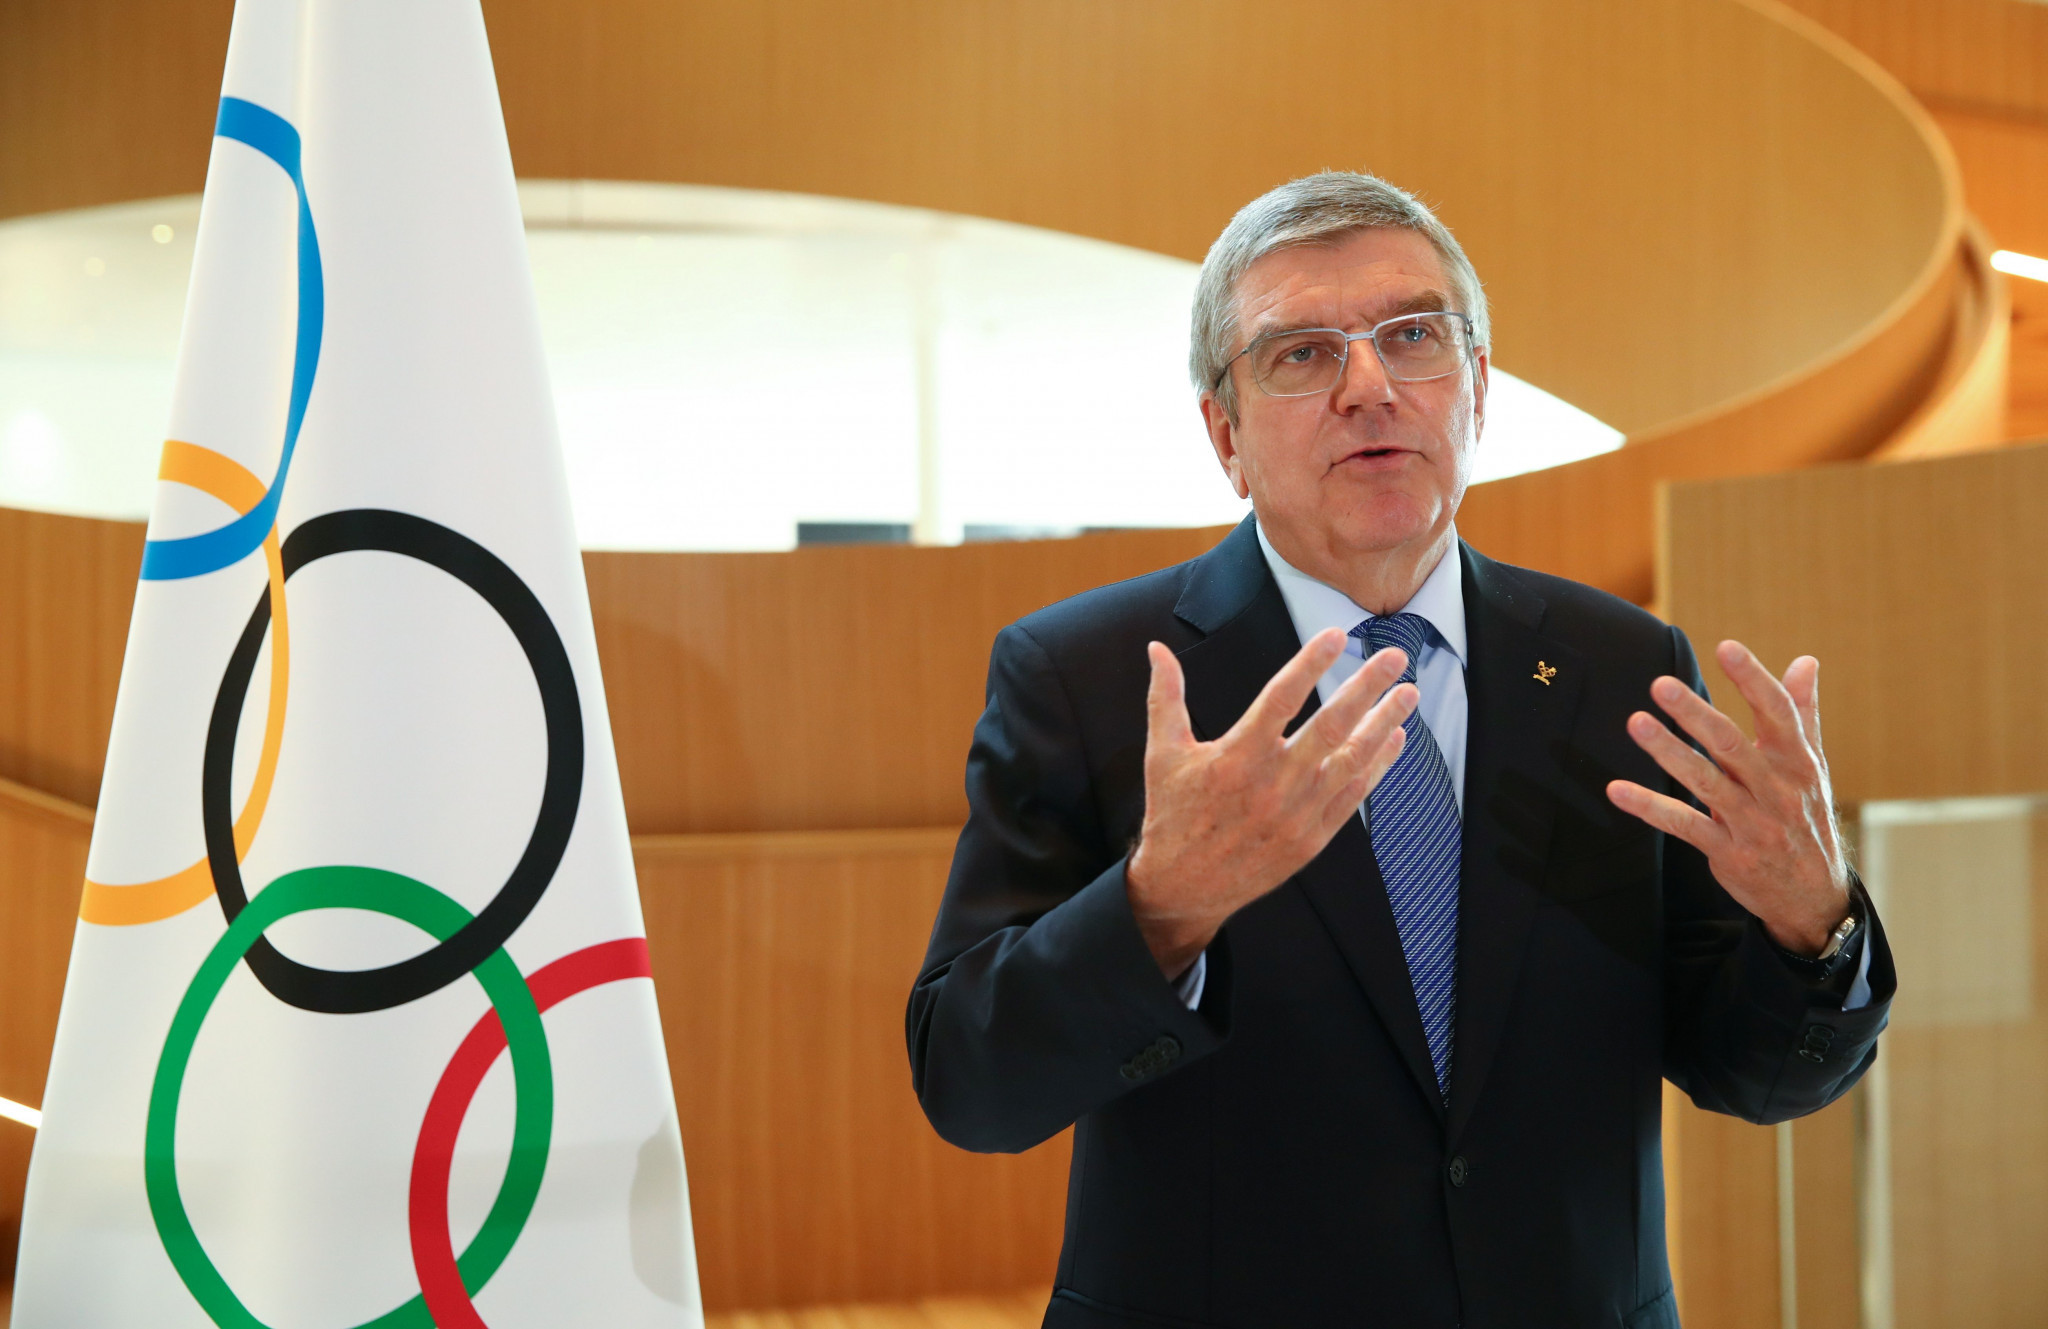 IOC President Thomas Bach says the UTS World Virtual Youth Festival is a "wonderful illustration of how sport always builds bridges" ©Getty Images